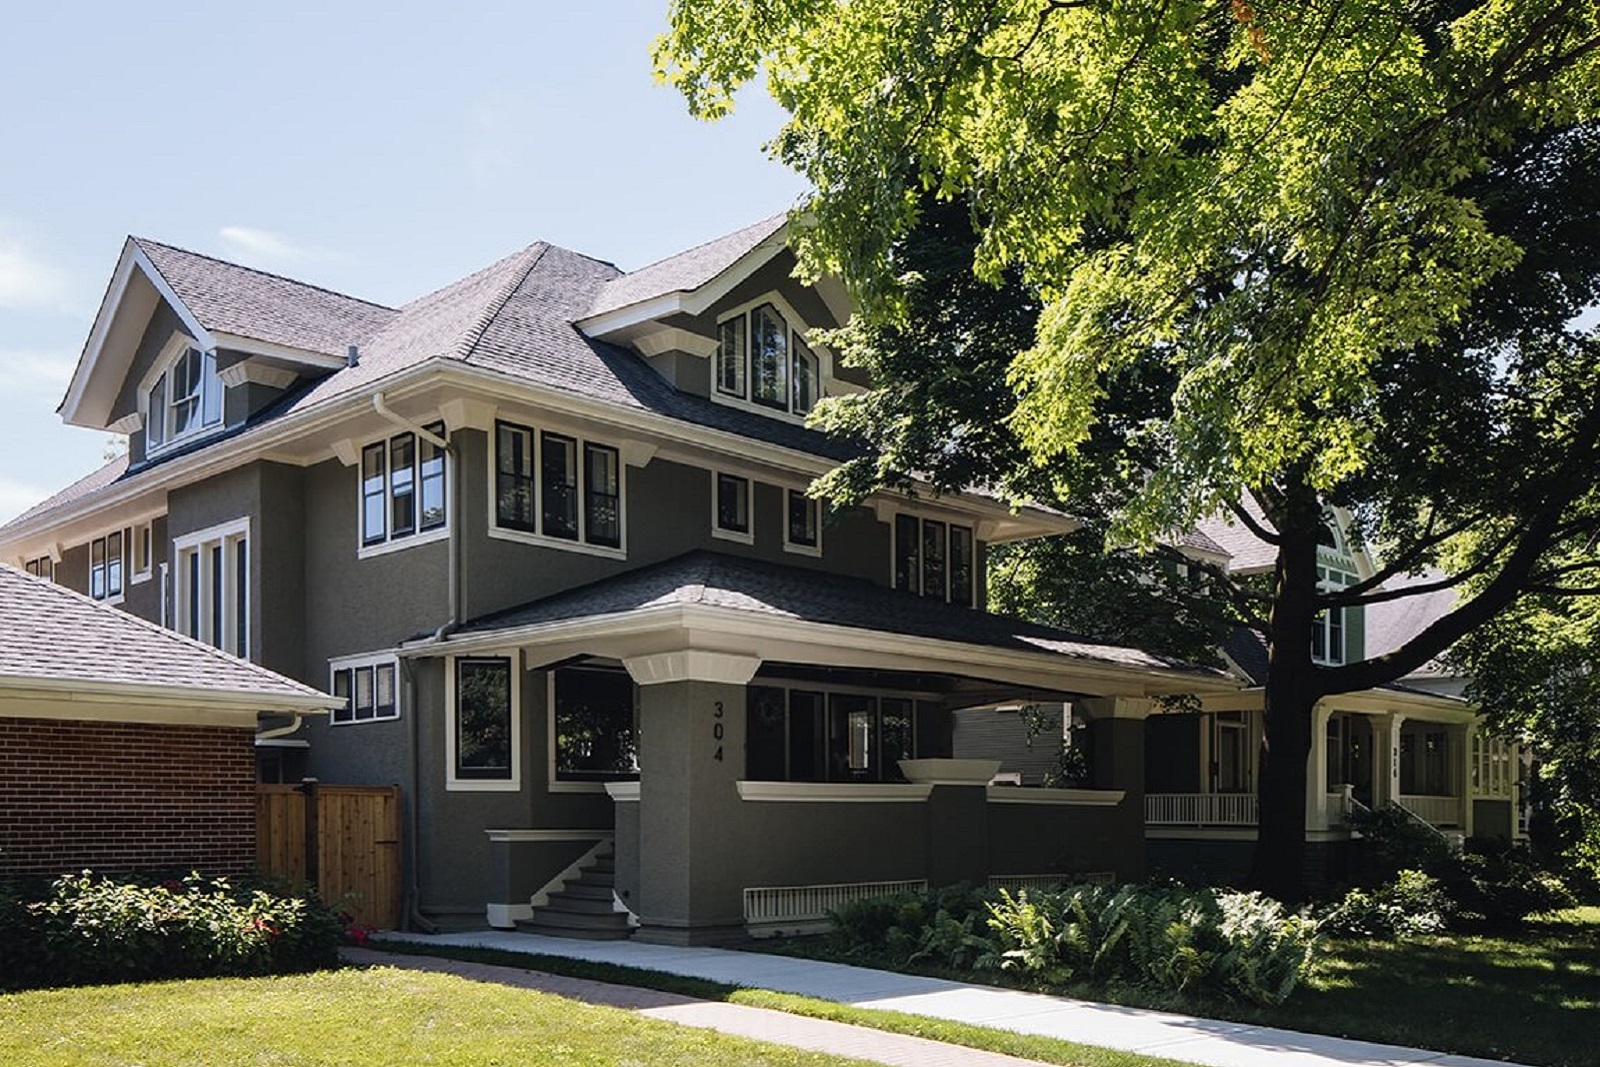 Lake Forest - Chicago area green architects & home builders